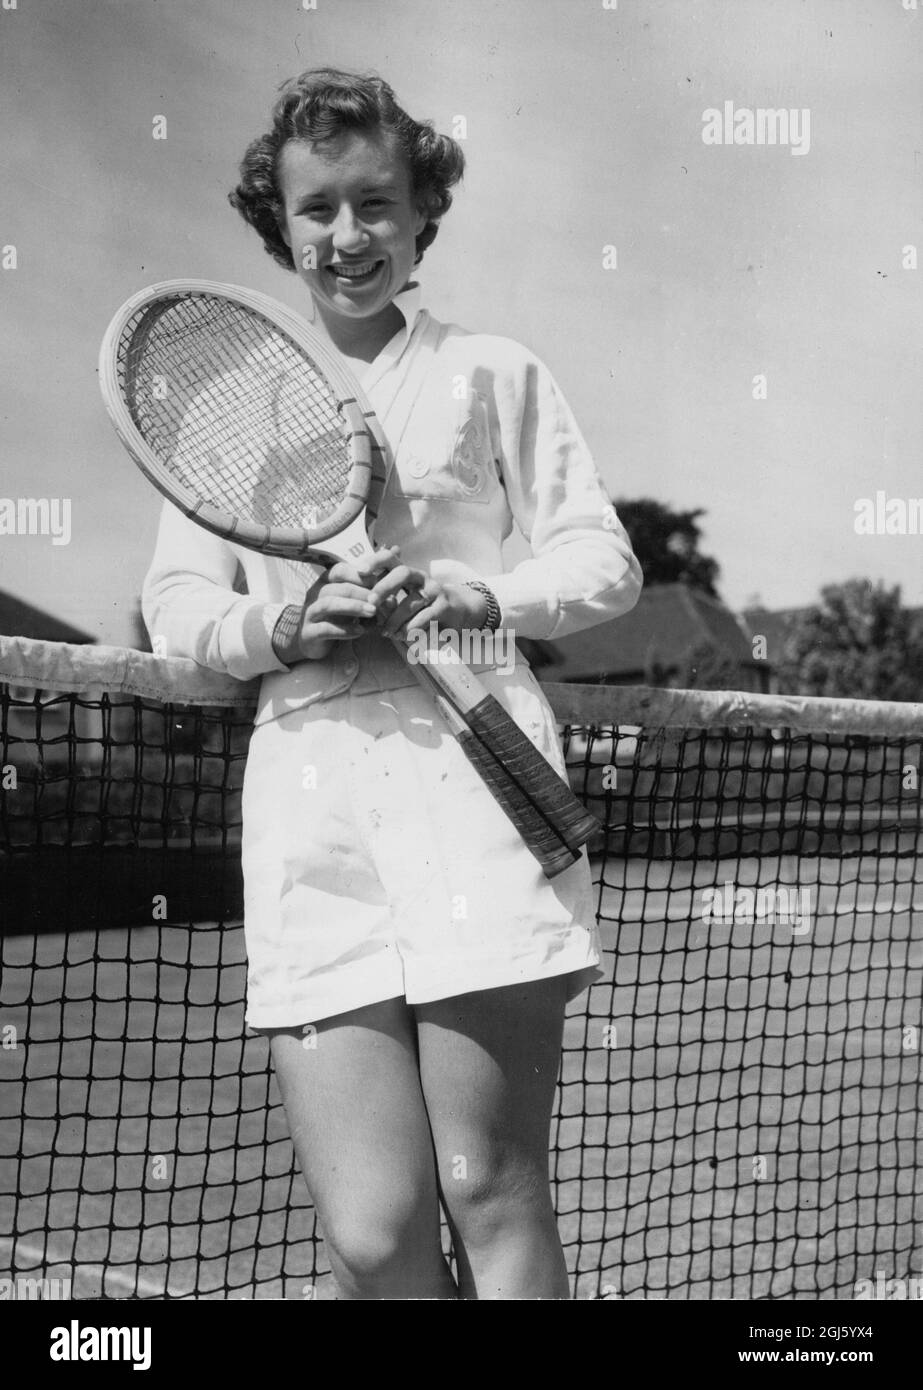 Maureen Connolly : 1934-1969 , American tennis player , Little Mo as she  was known , seen as she practices at the Surbiton Club , Surrey , England  21 May 1952 Stock Photo - Alamy